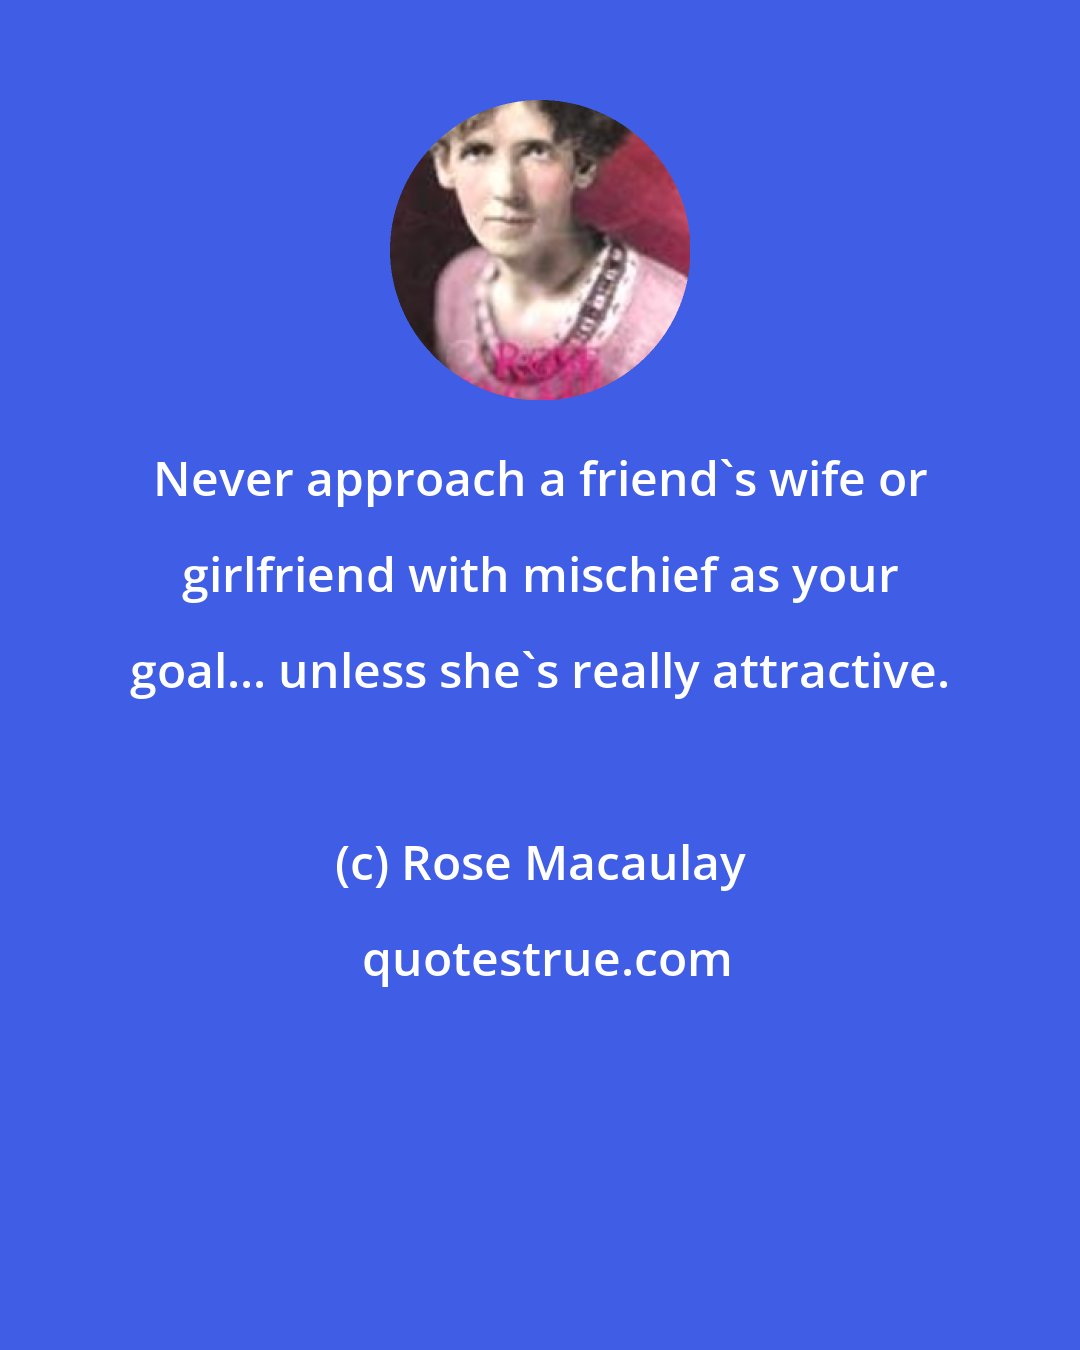 Rose Macaulay: Never approach a friend's wife or girlfriend with mischief as your goal... unless she's really attractive.